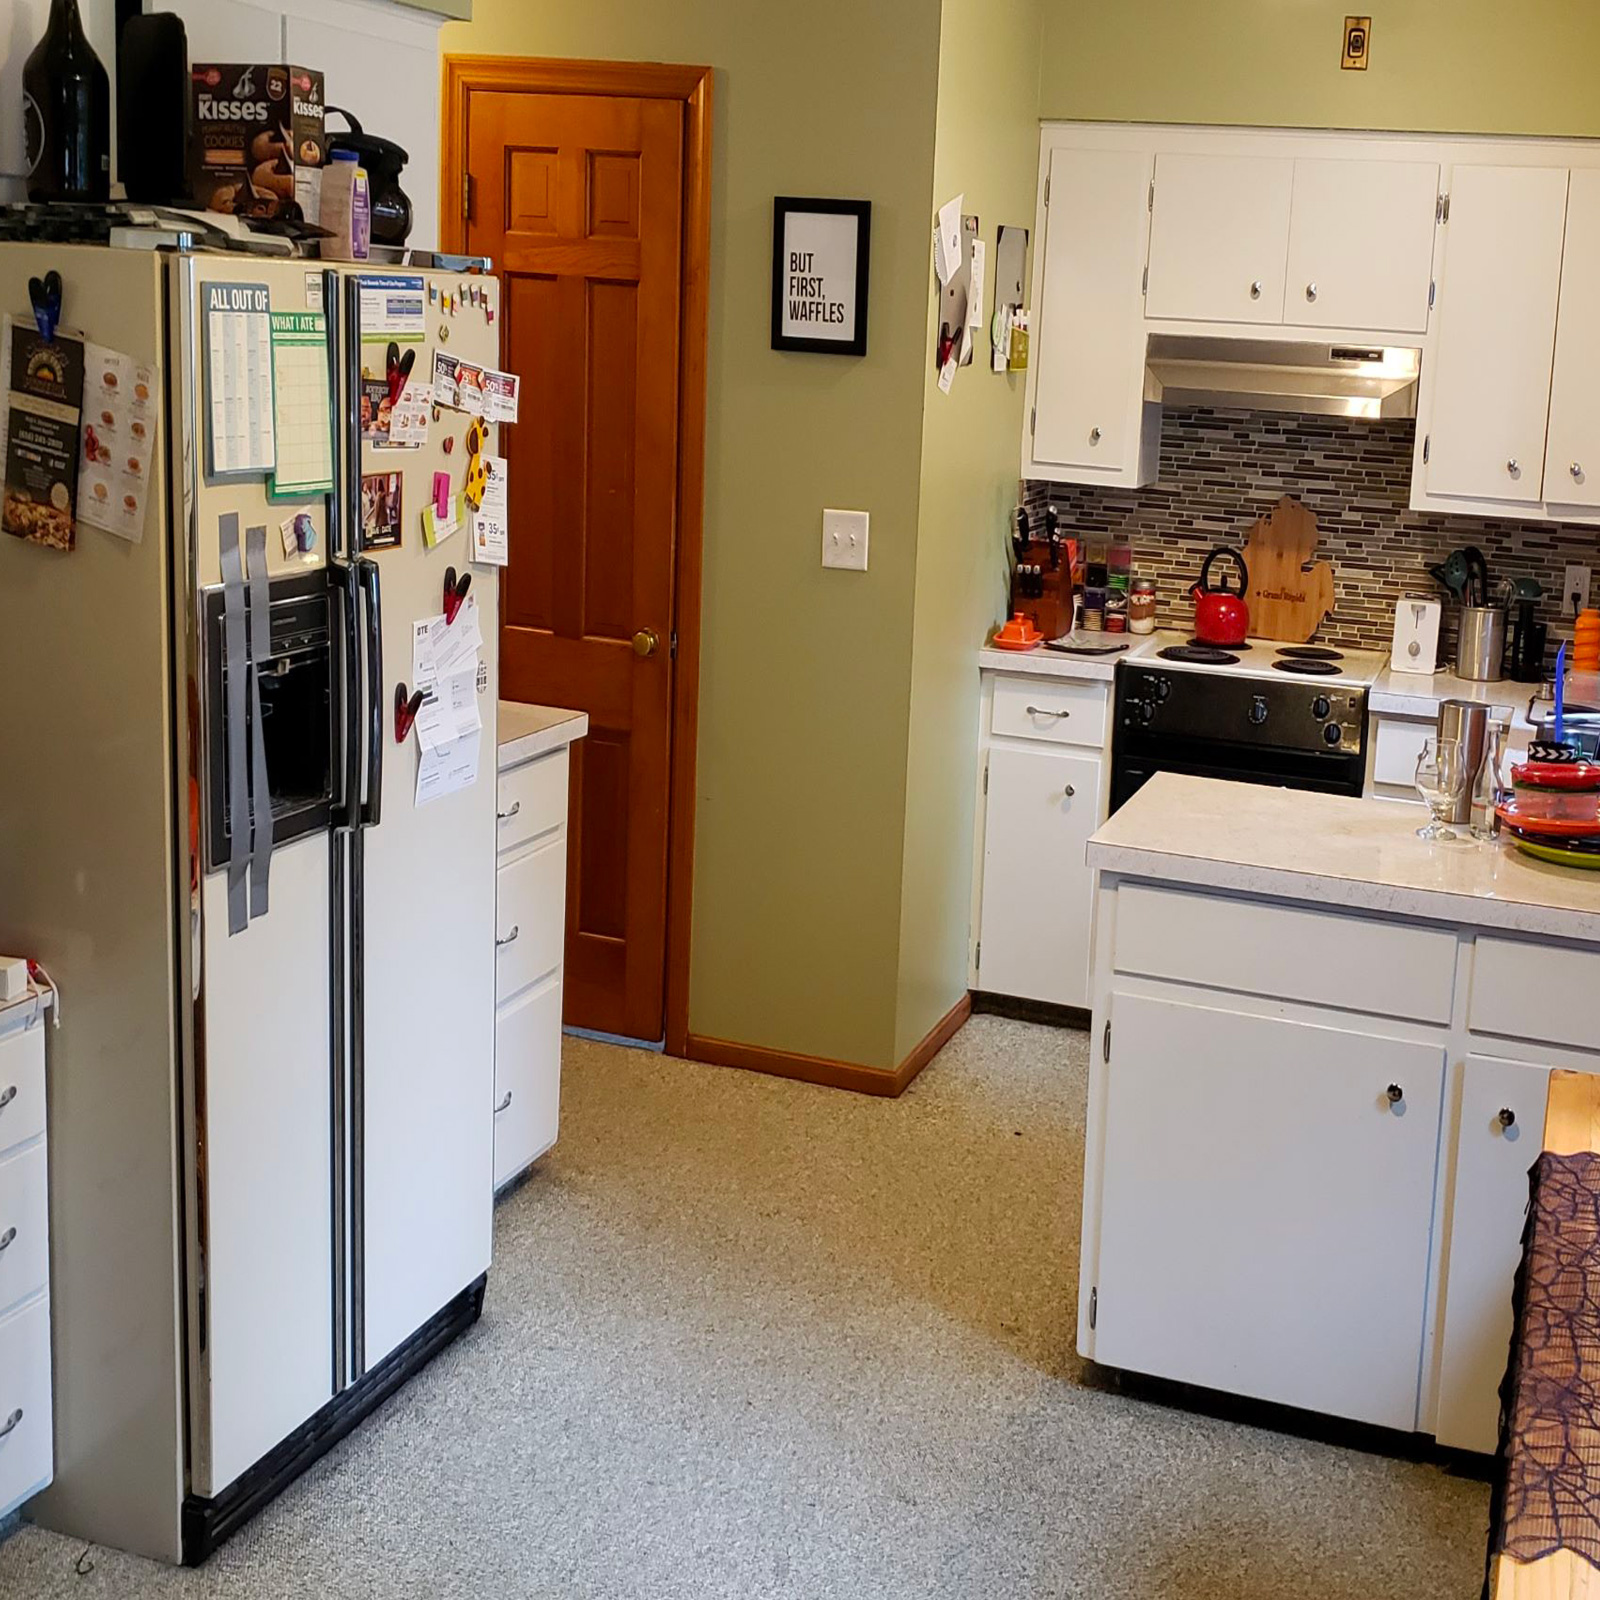 Entry 2 - With outdated cabinetry & poor design this kitchen could use a facelift